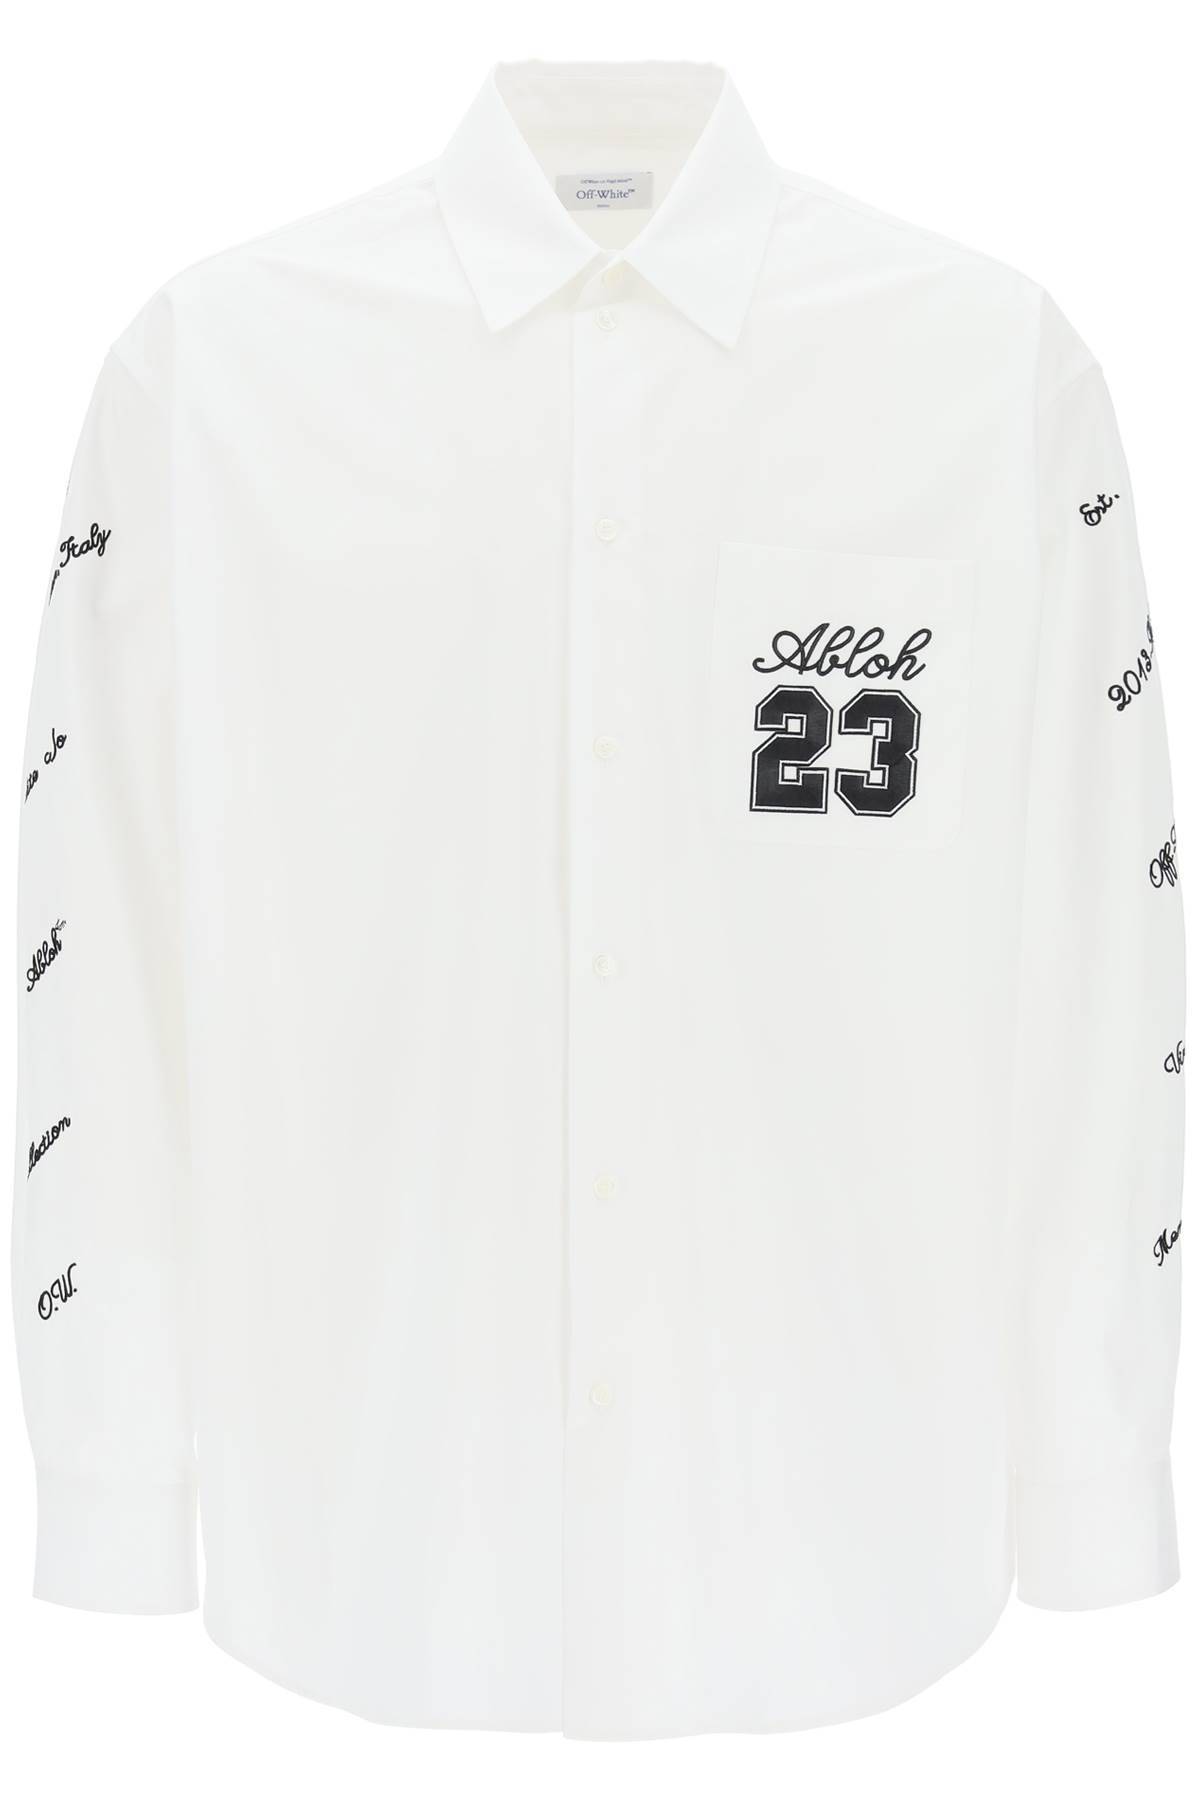 OFF-WHITE OFF-WHITE "oversized shirt with